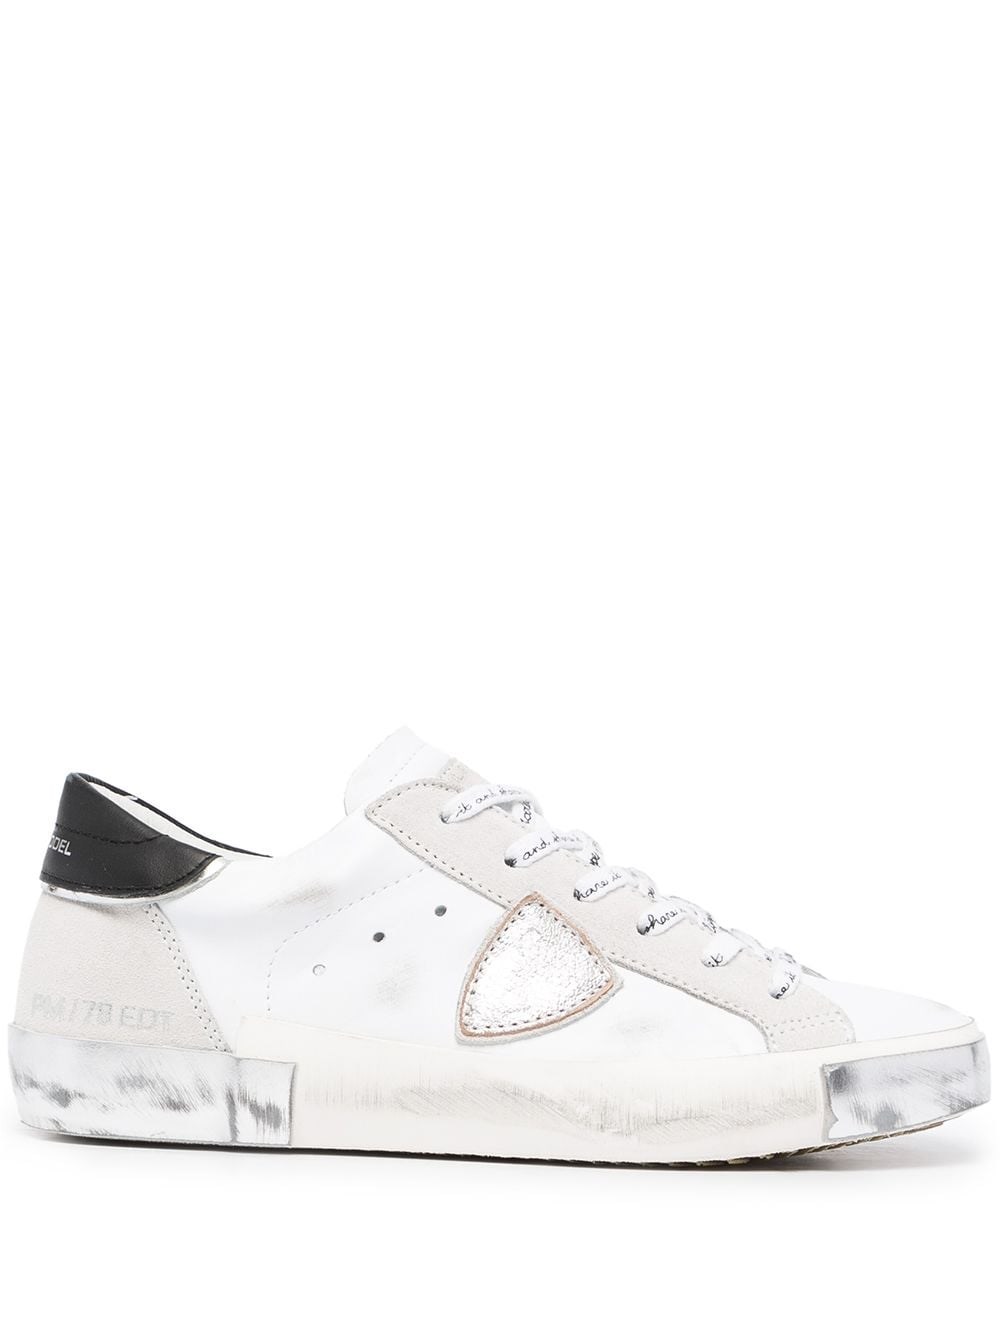 Philippe Model Prsx Sneakers In Leather And Suede In White